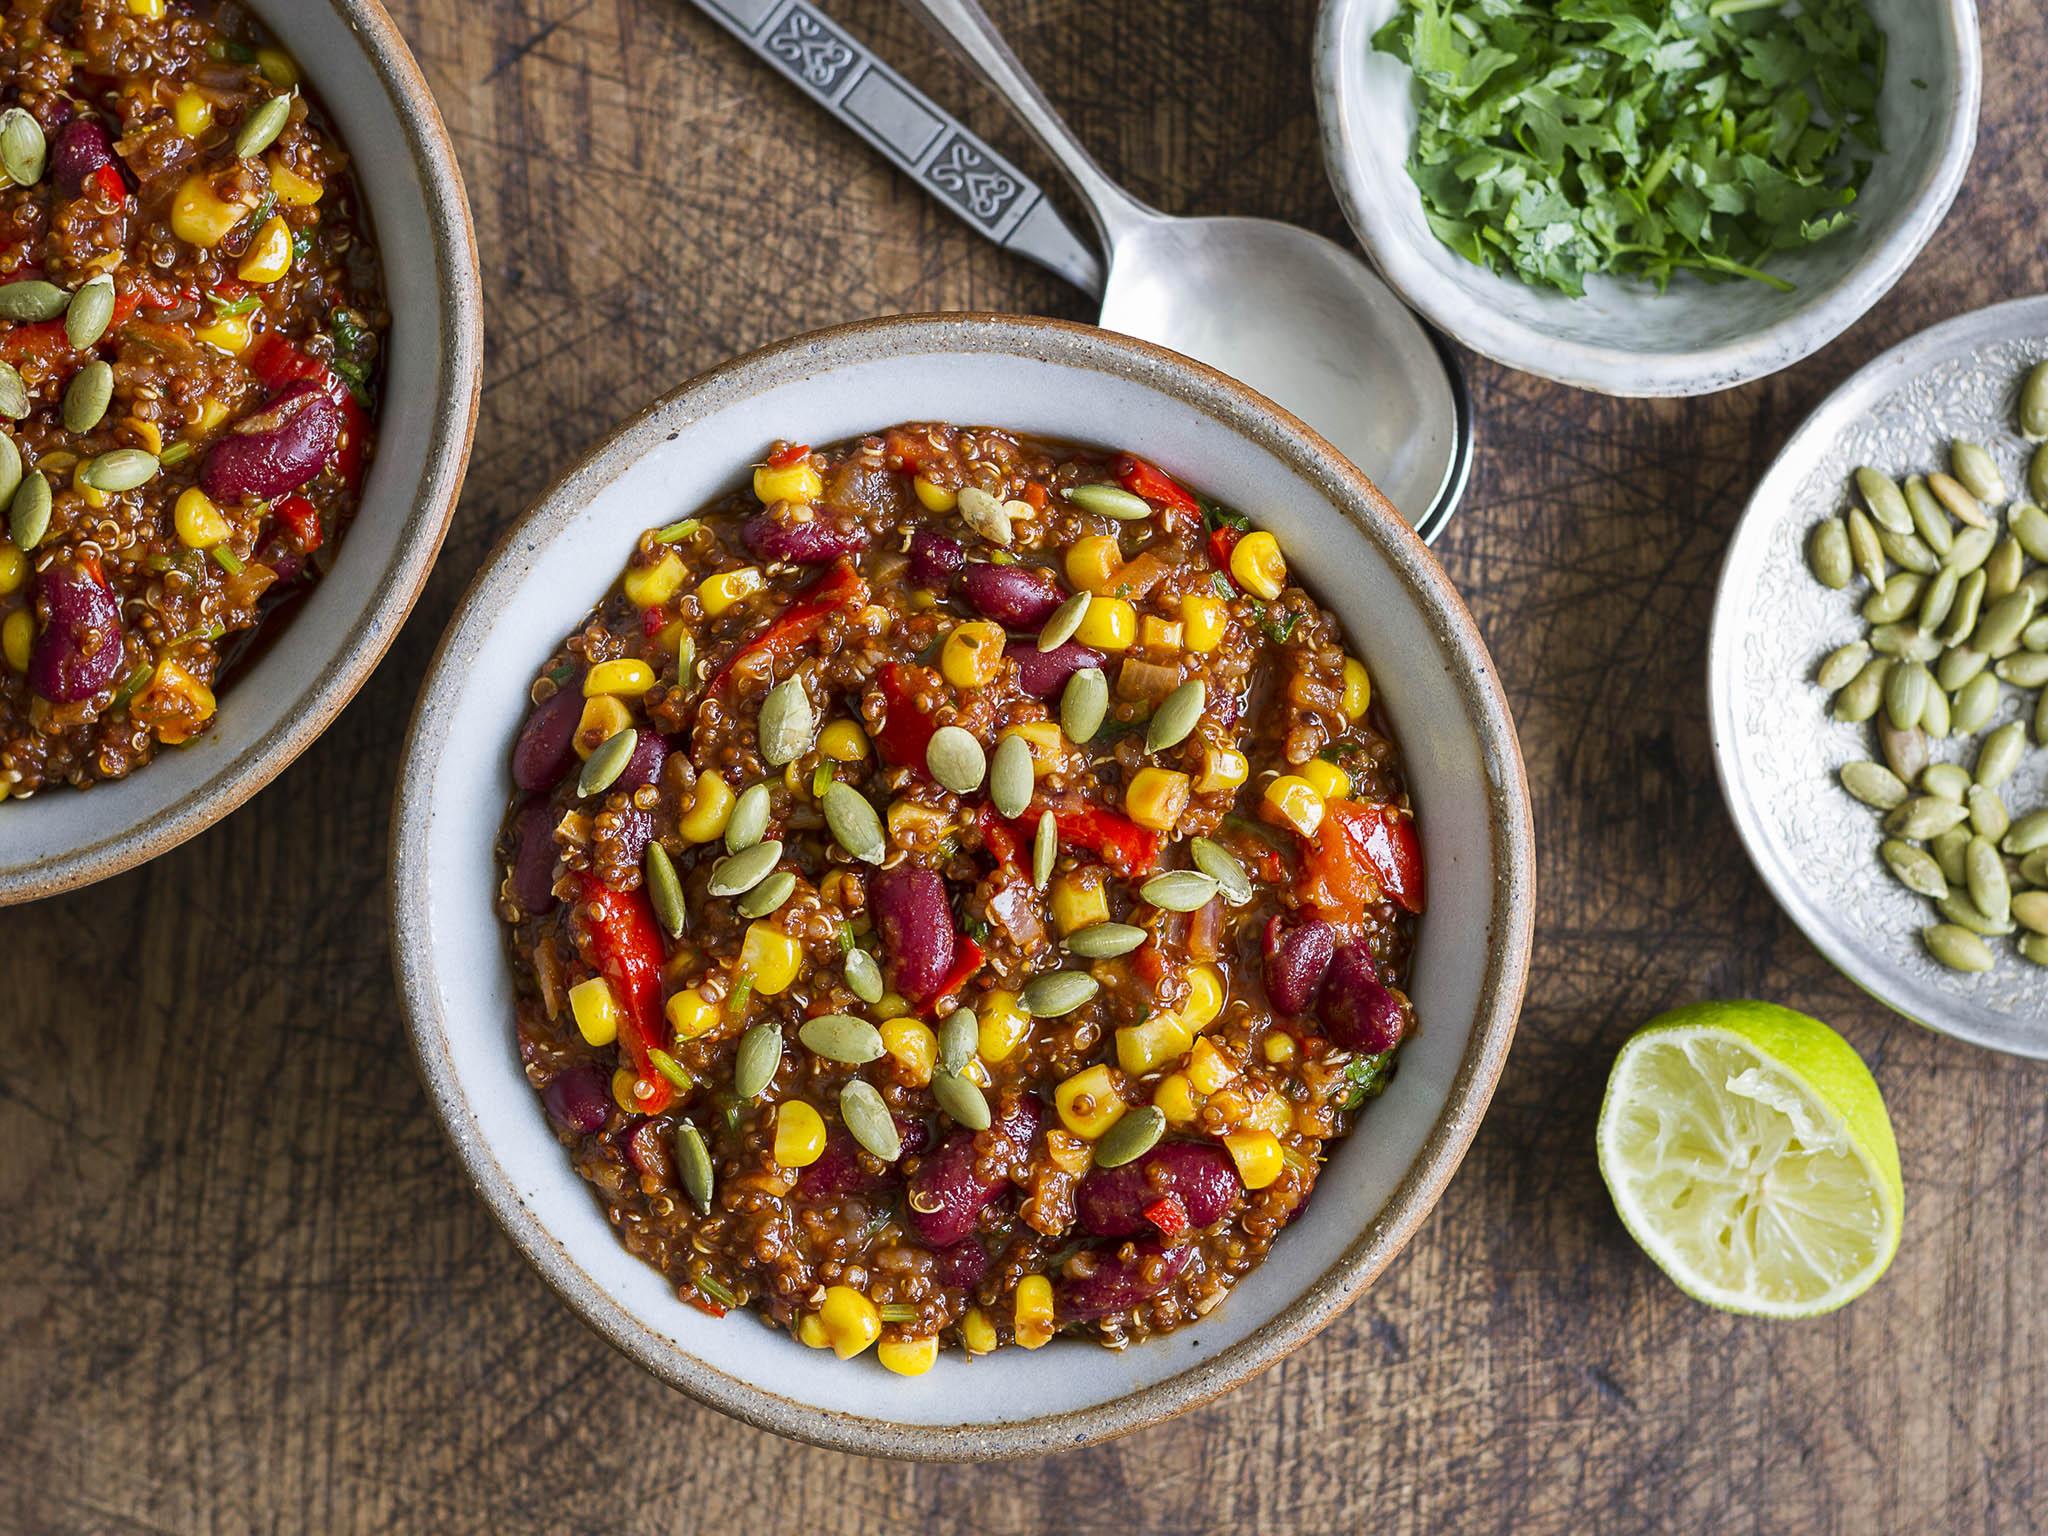 How to make red quinoa, corn and chilli beans | The Independent | The ...